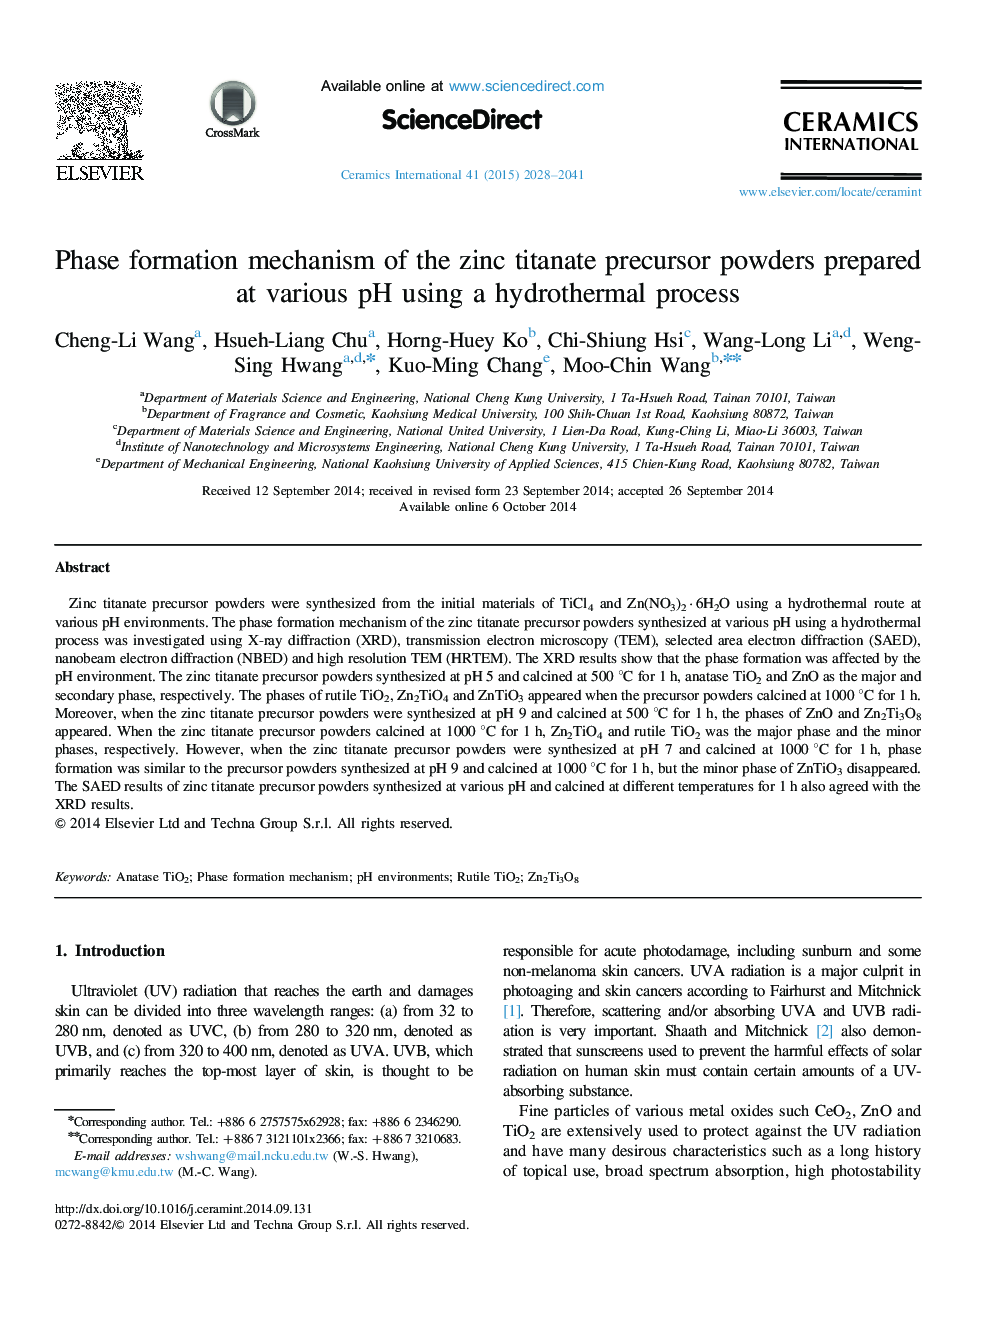 Phase formation mechanism of the zinc titanate precursor powders prepared at various pH using a hydrothermal process